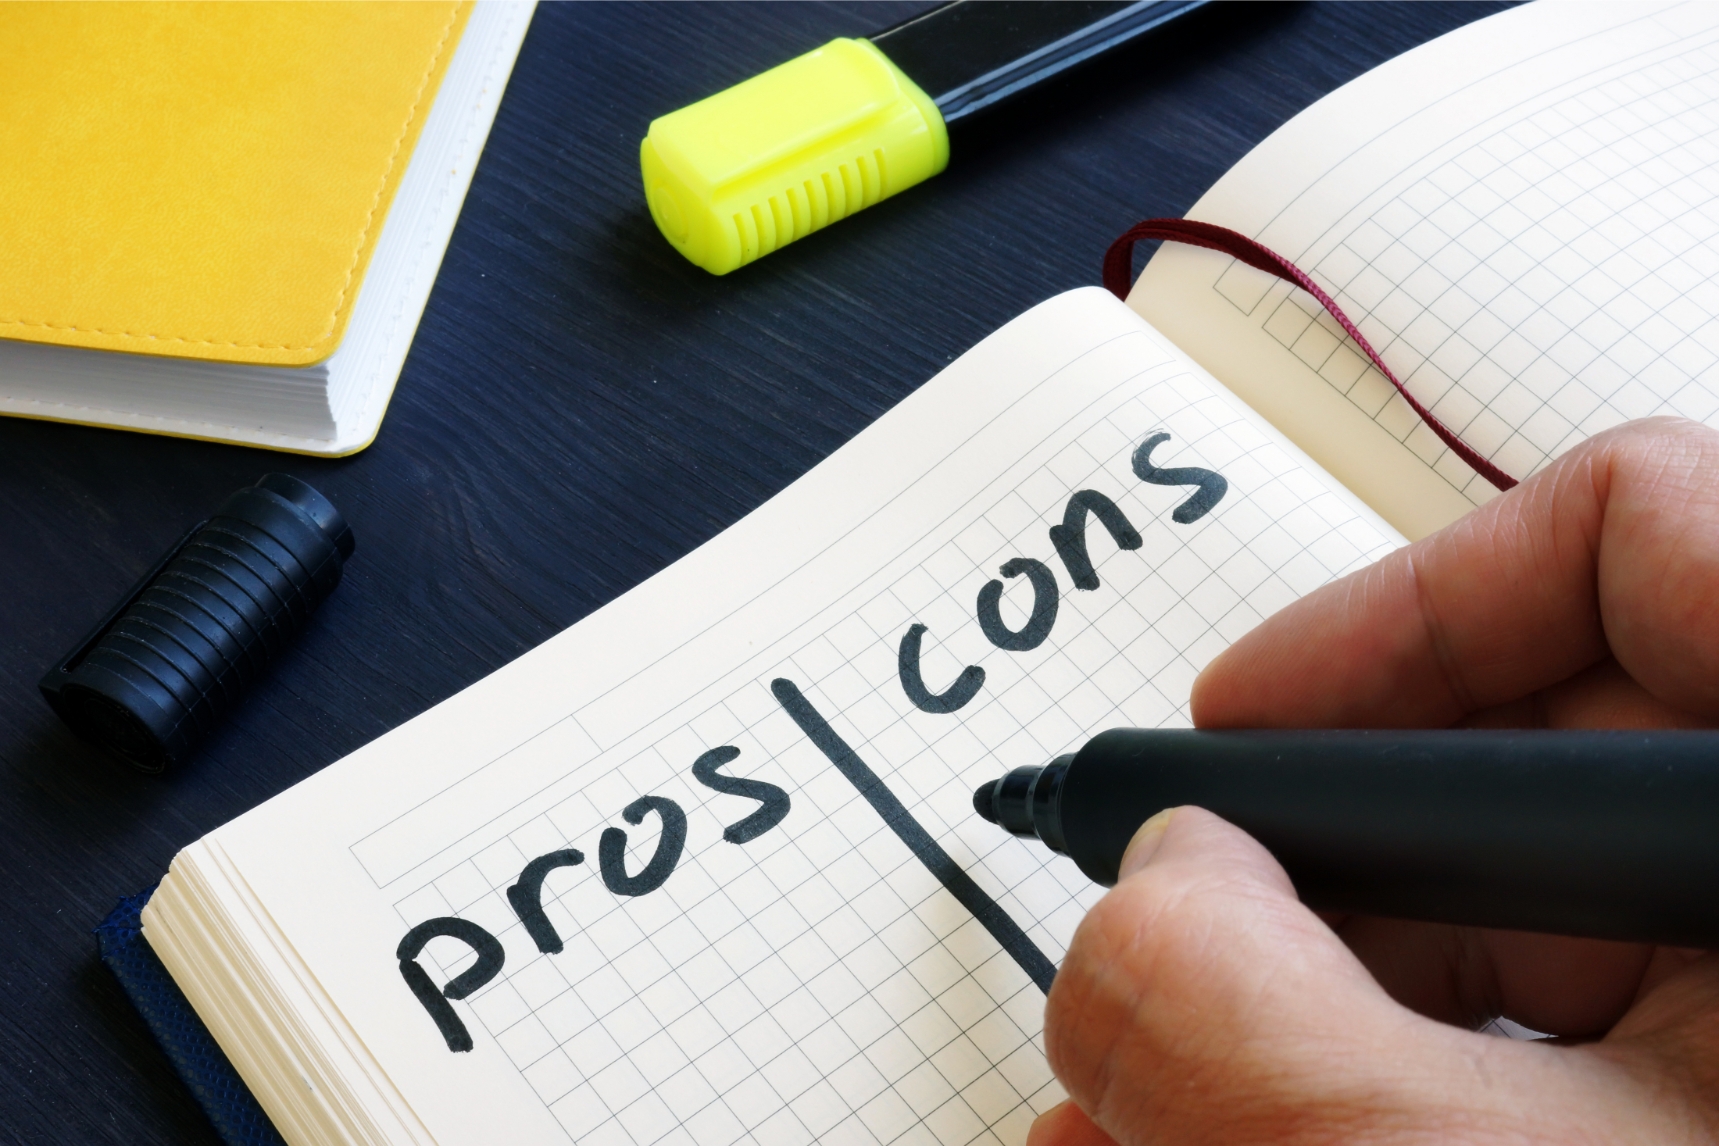 Writing list of pros and cons